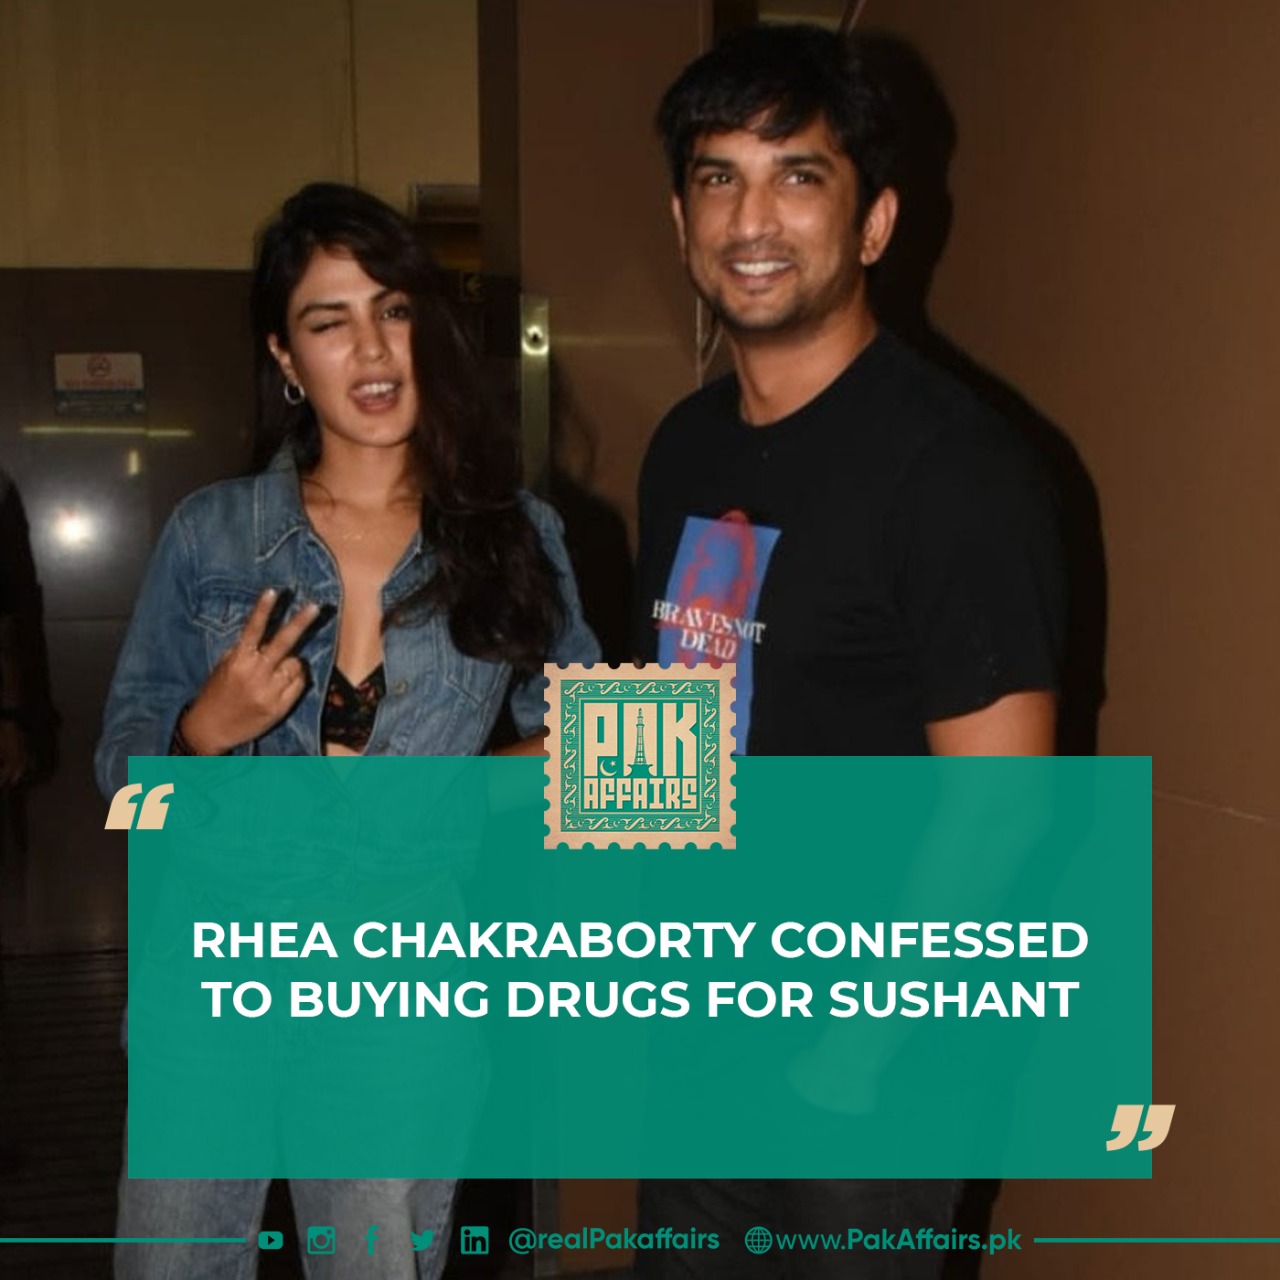 Rhea Chakraborty confessed to buying drugs for Sushant.